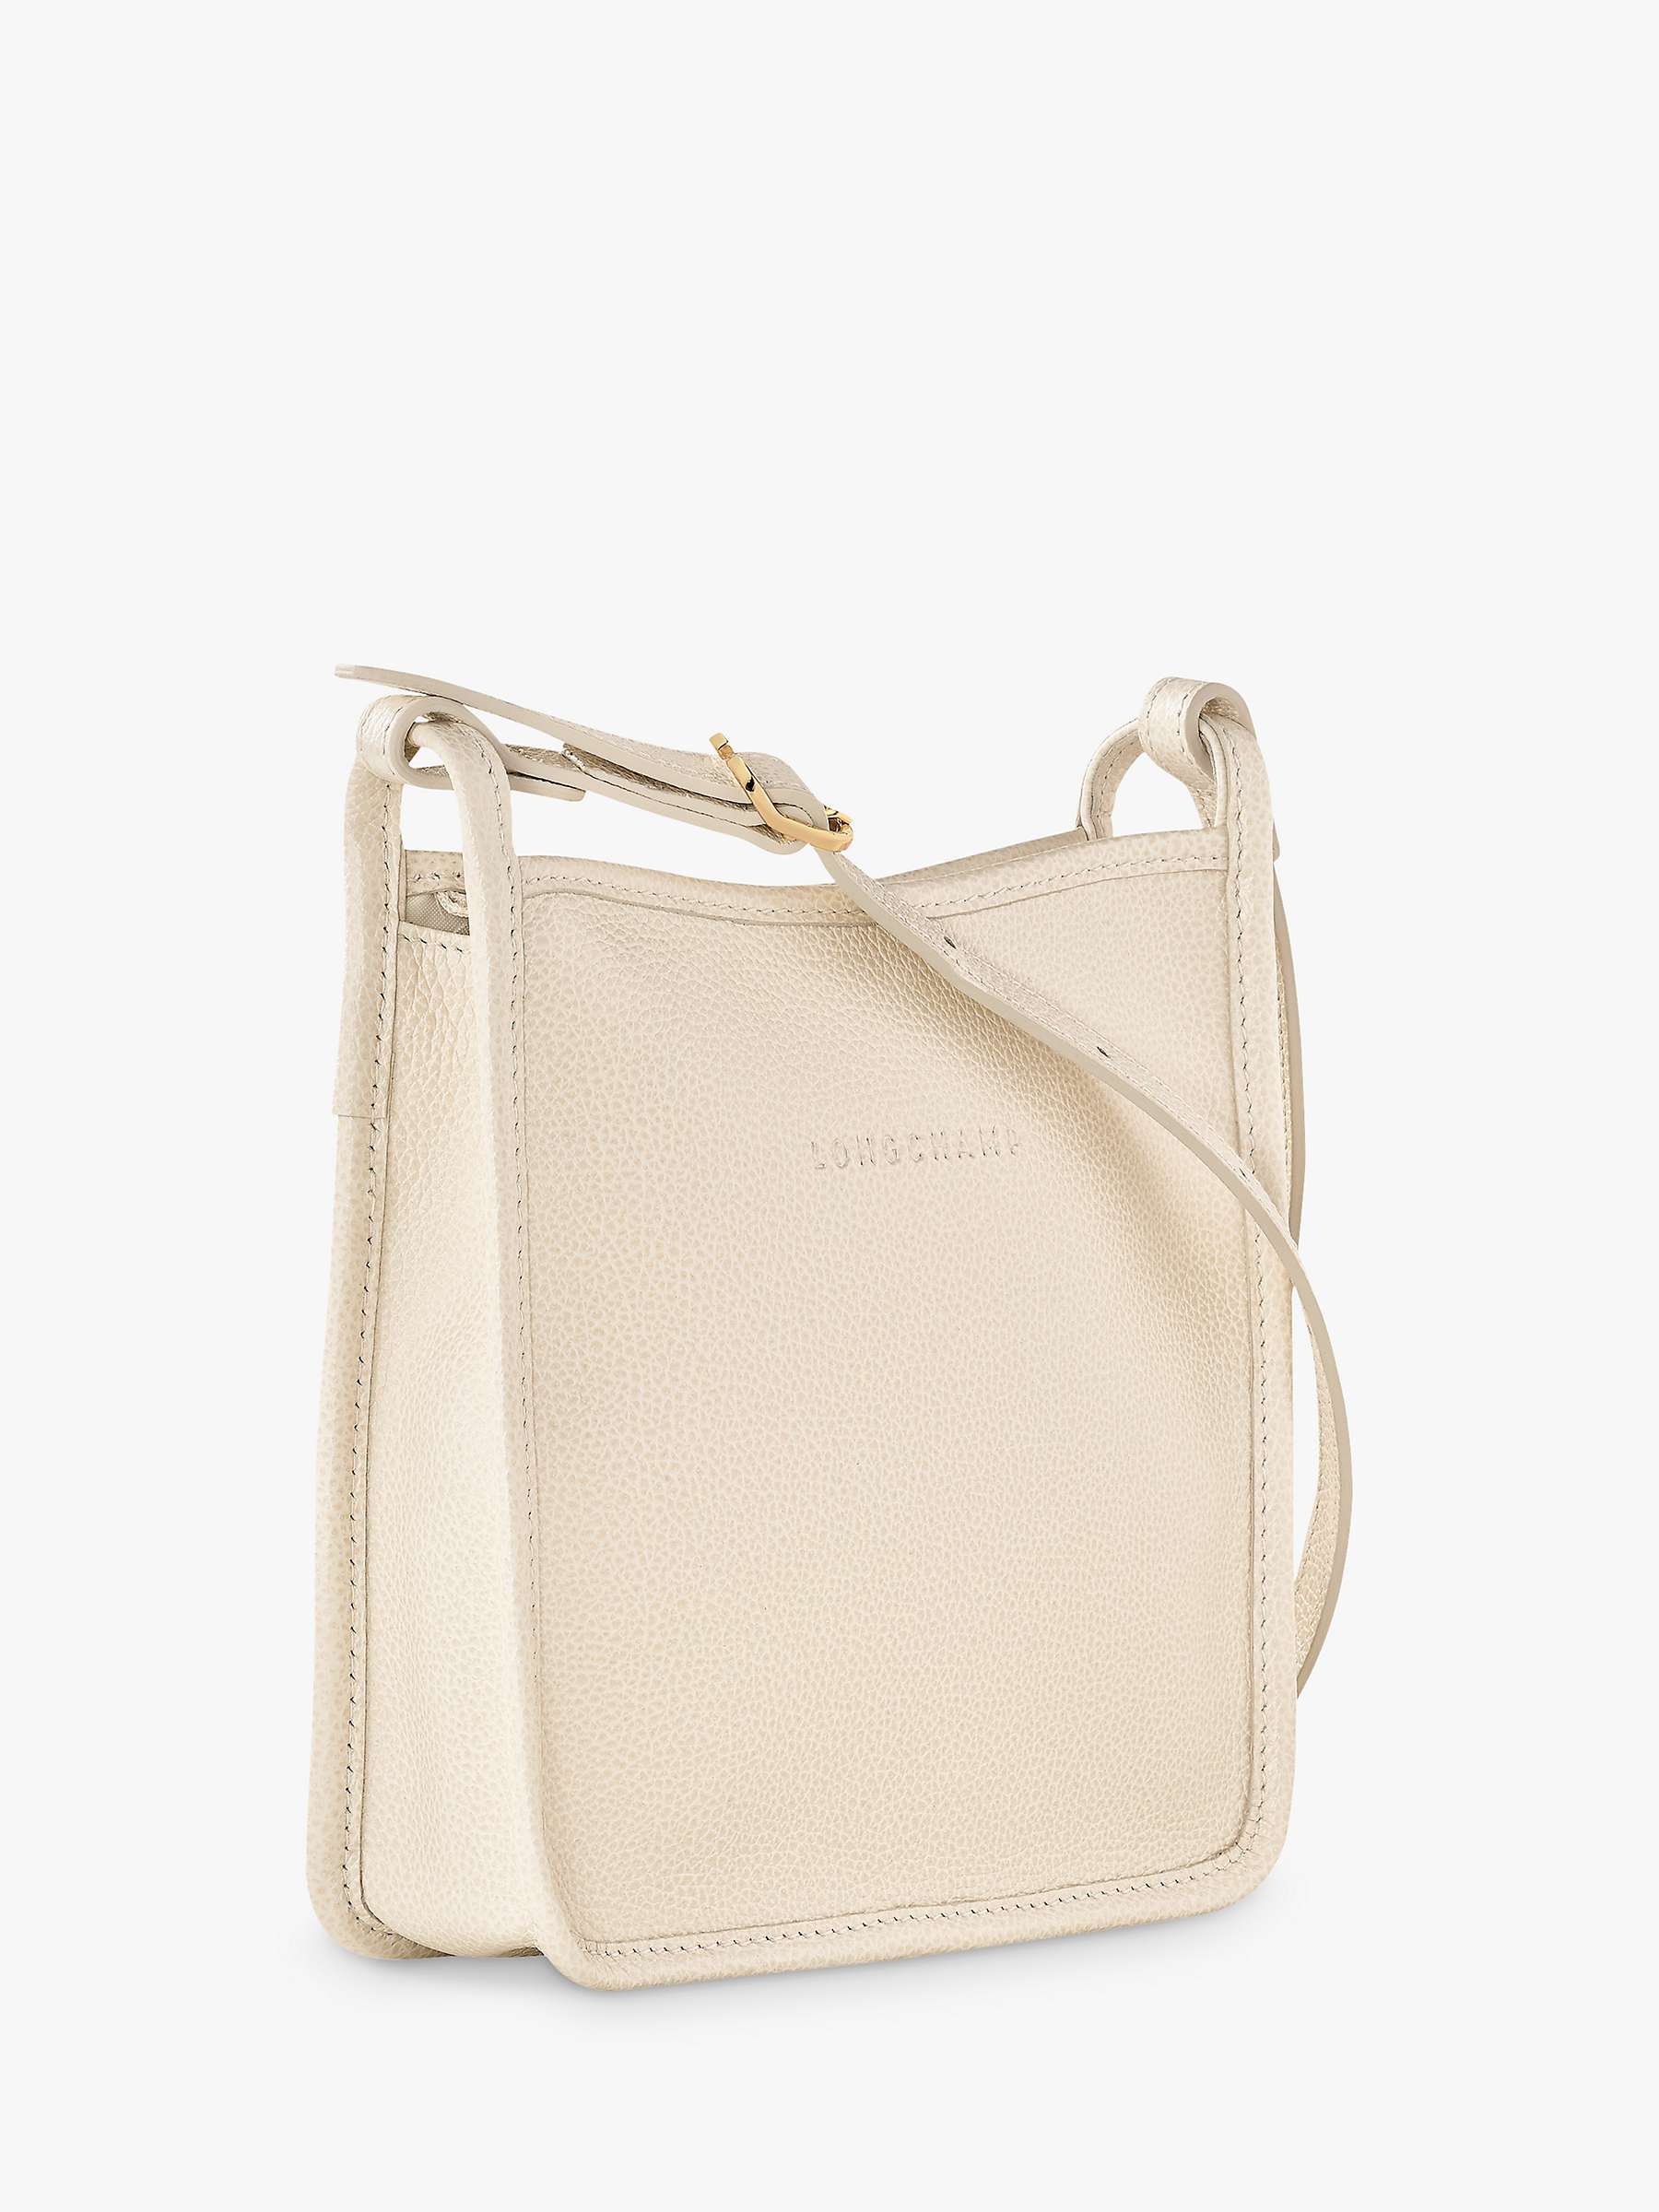 Buy Longchamp Le Foulonne Small Leather Cross Body Bag, Paper Online at johnlewis.com